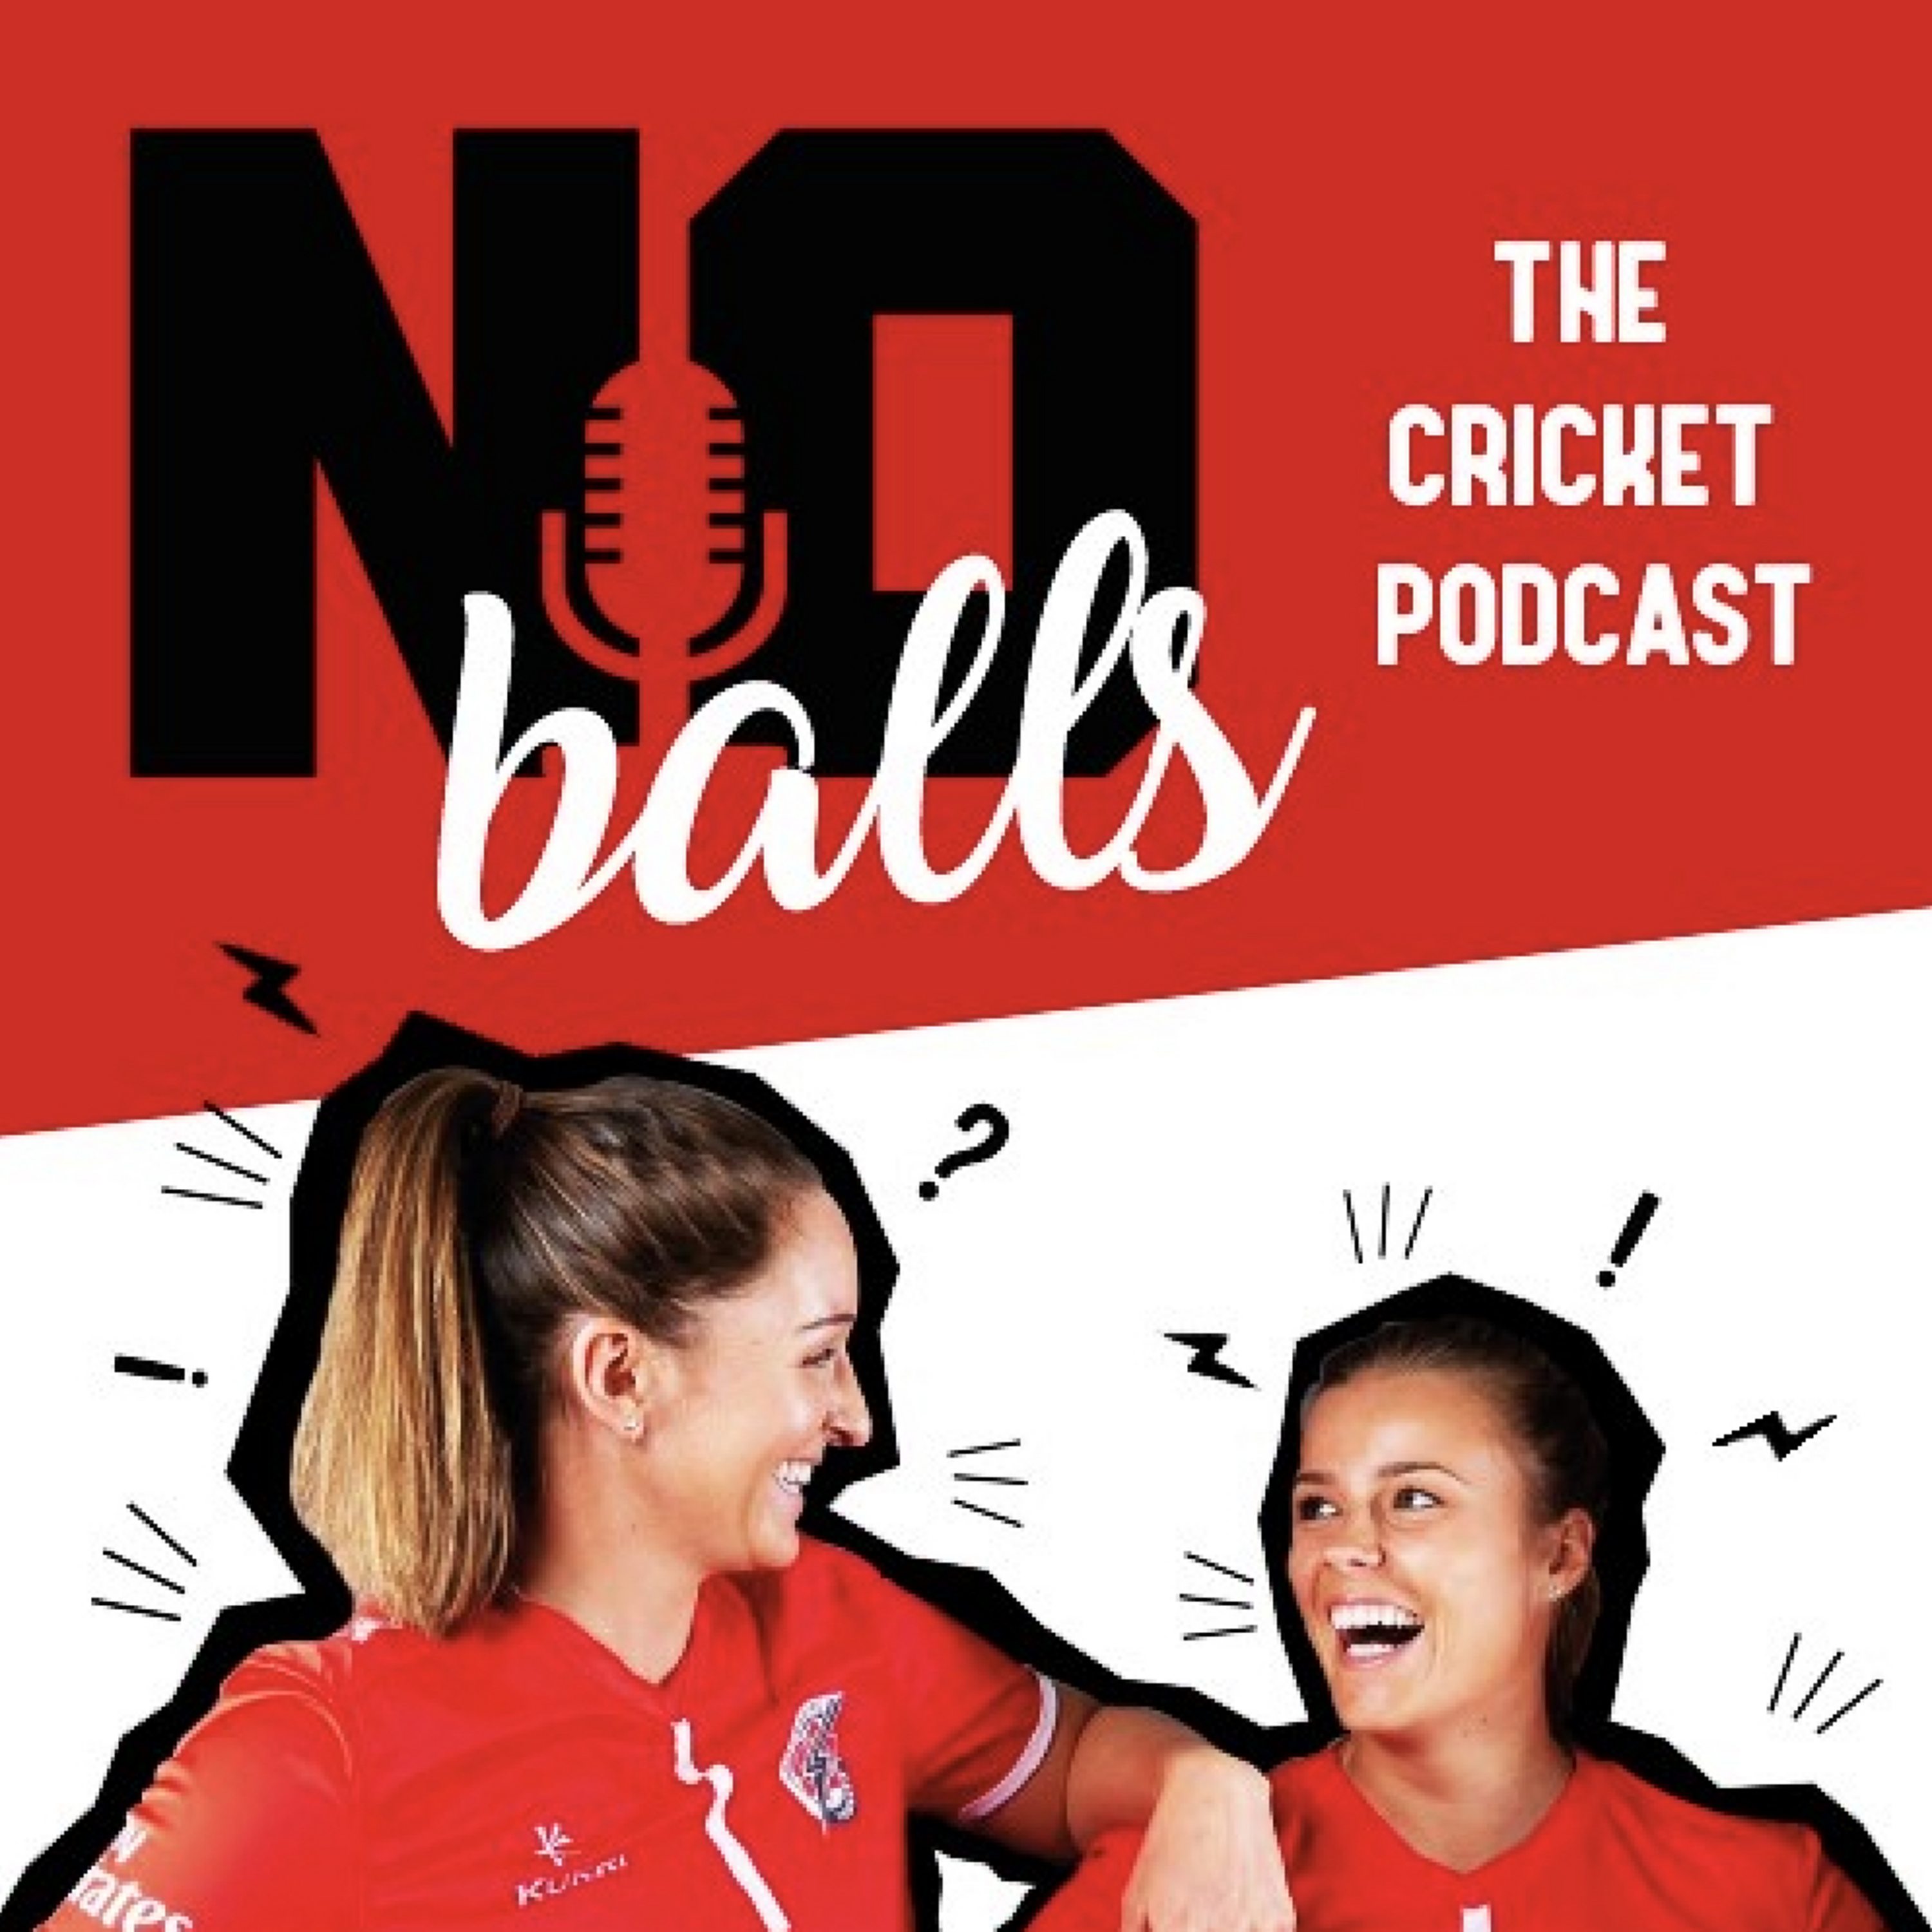 No Balls: The Cricket Podcast - time for the semis!